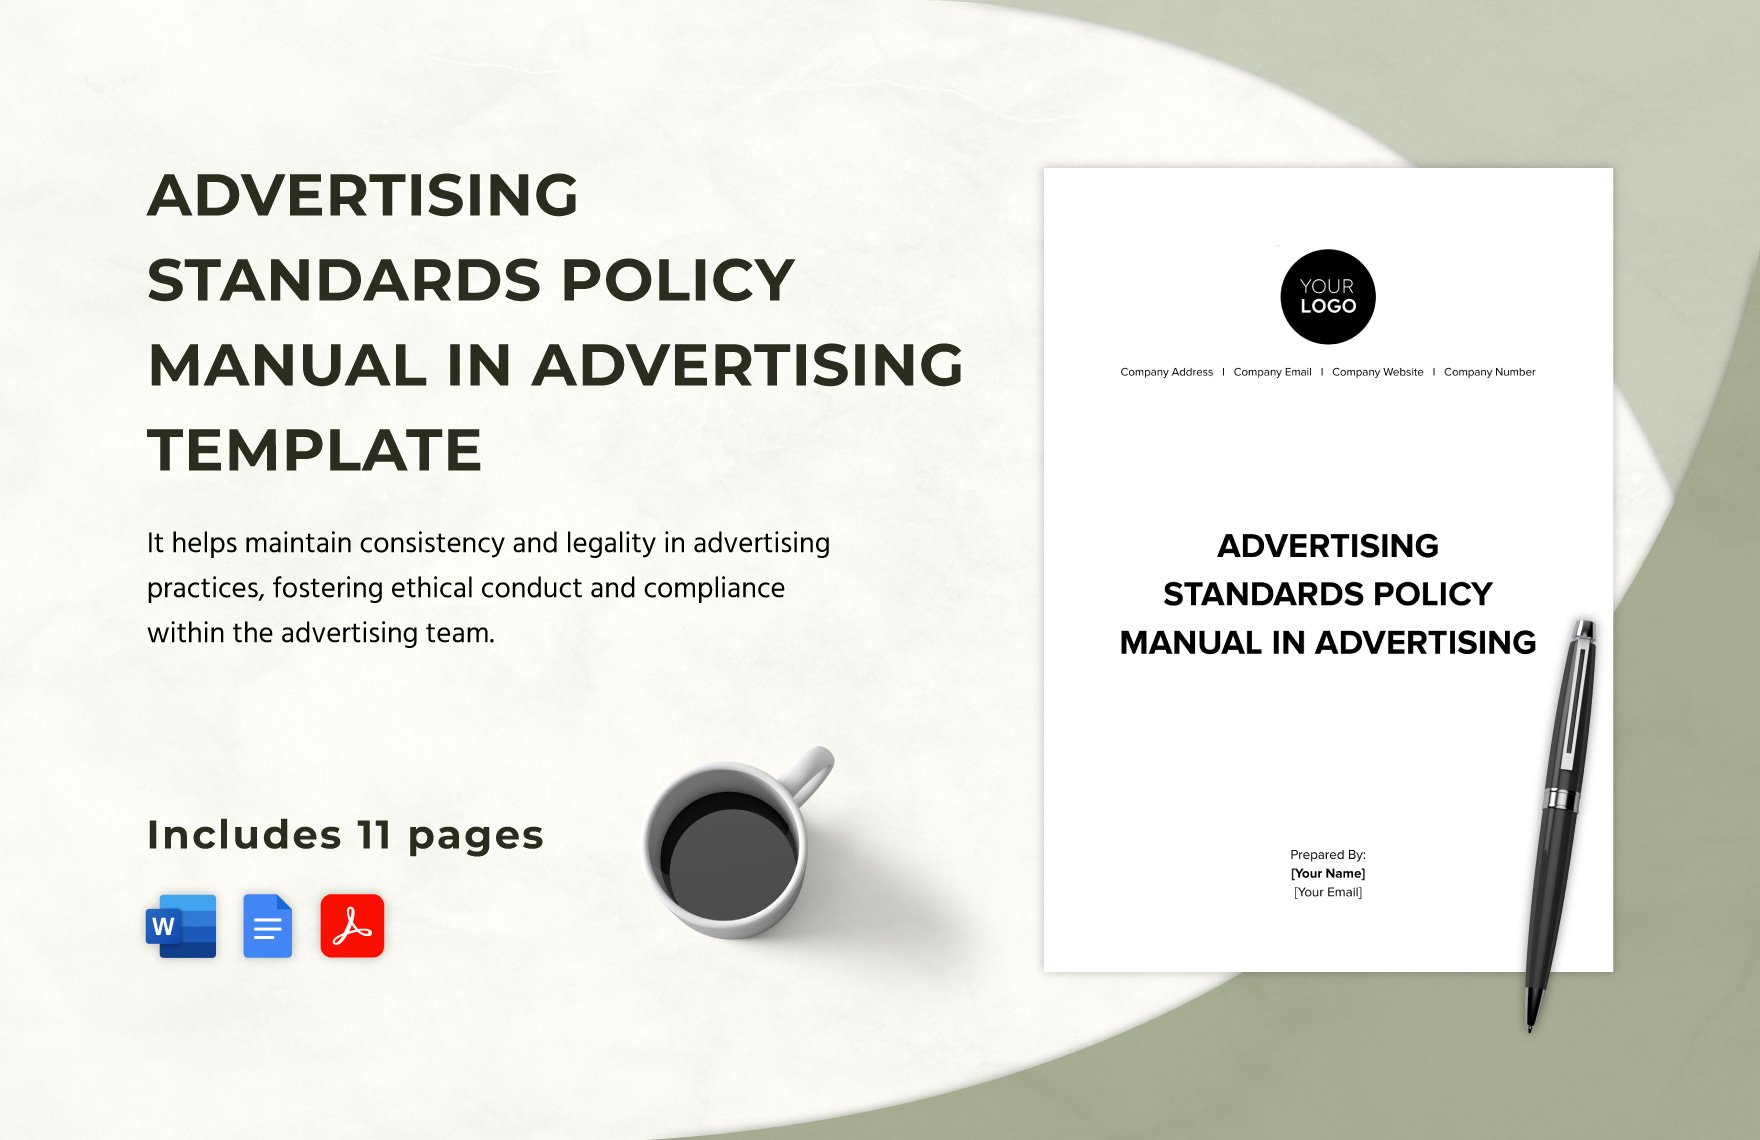 Advertising Standards Policy Manual in Advertising Template